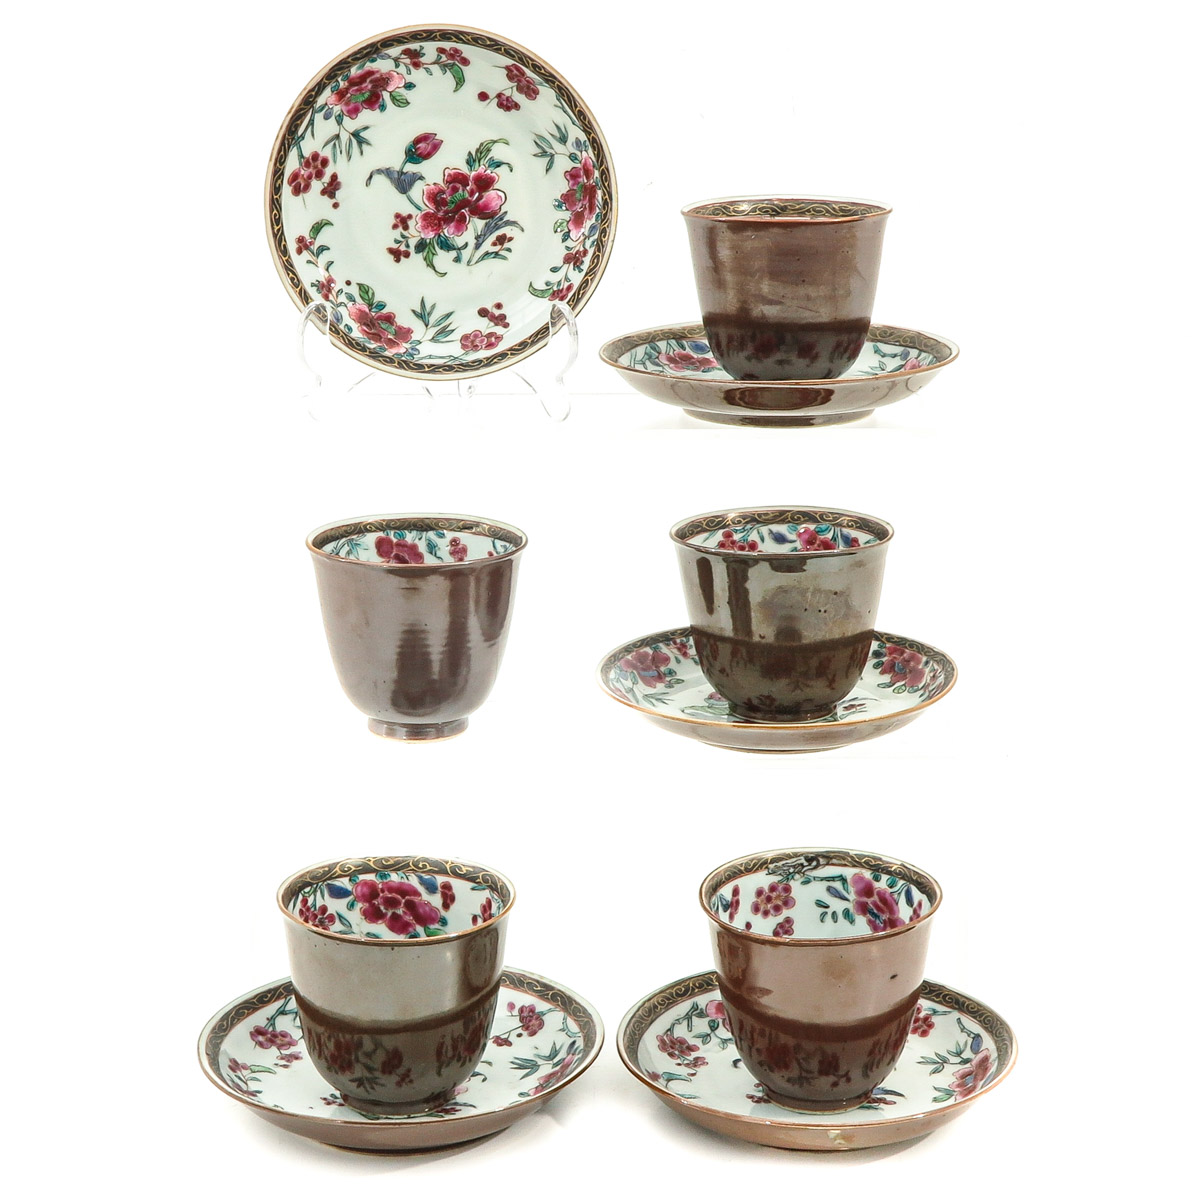 A Series of 5 Batavianware Cups and Saucers